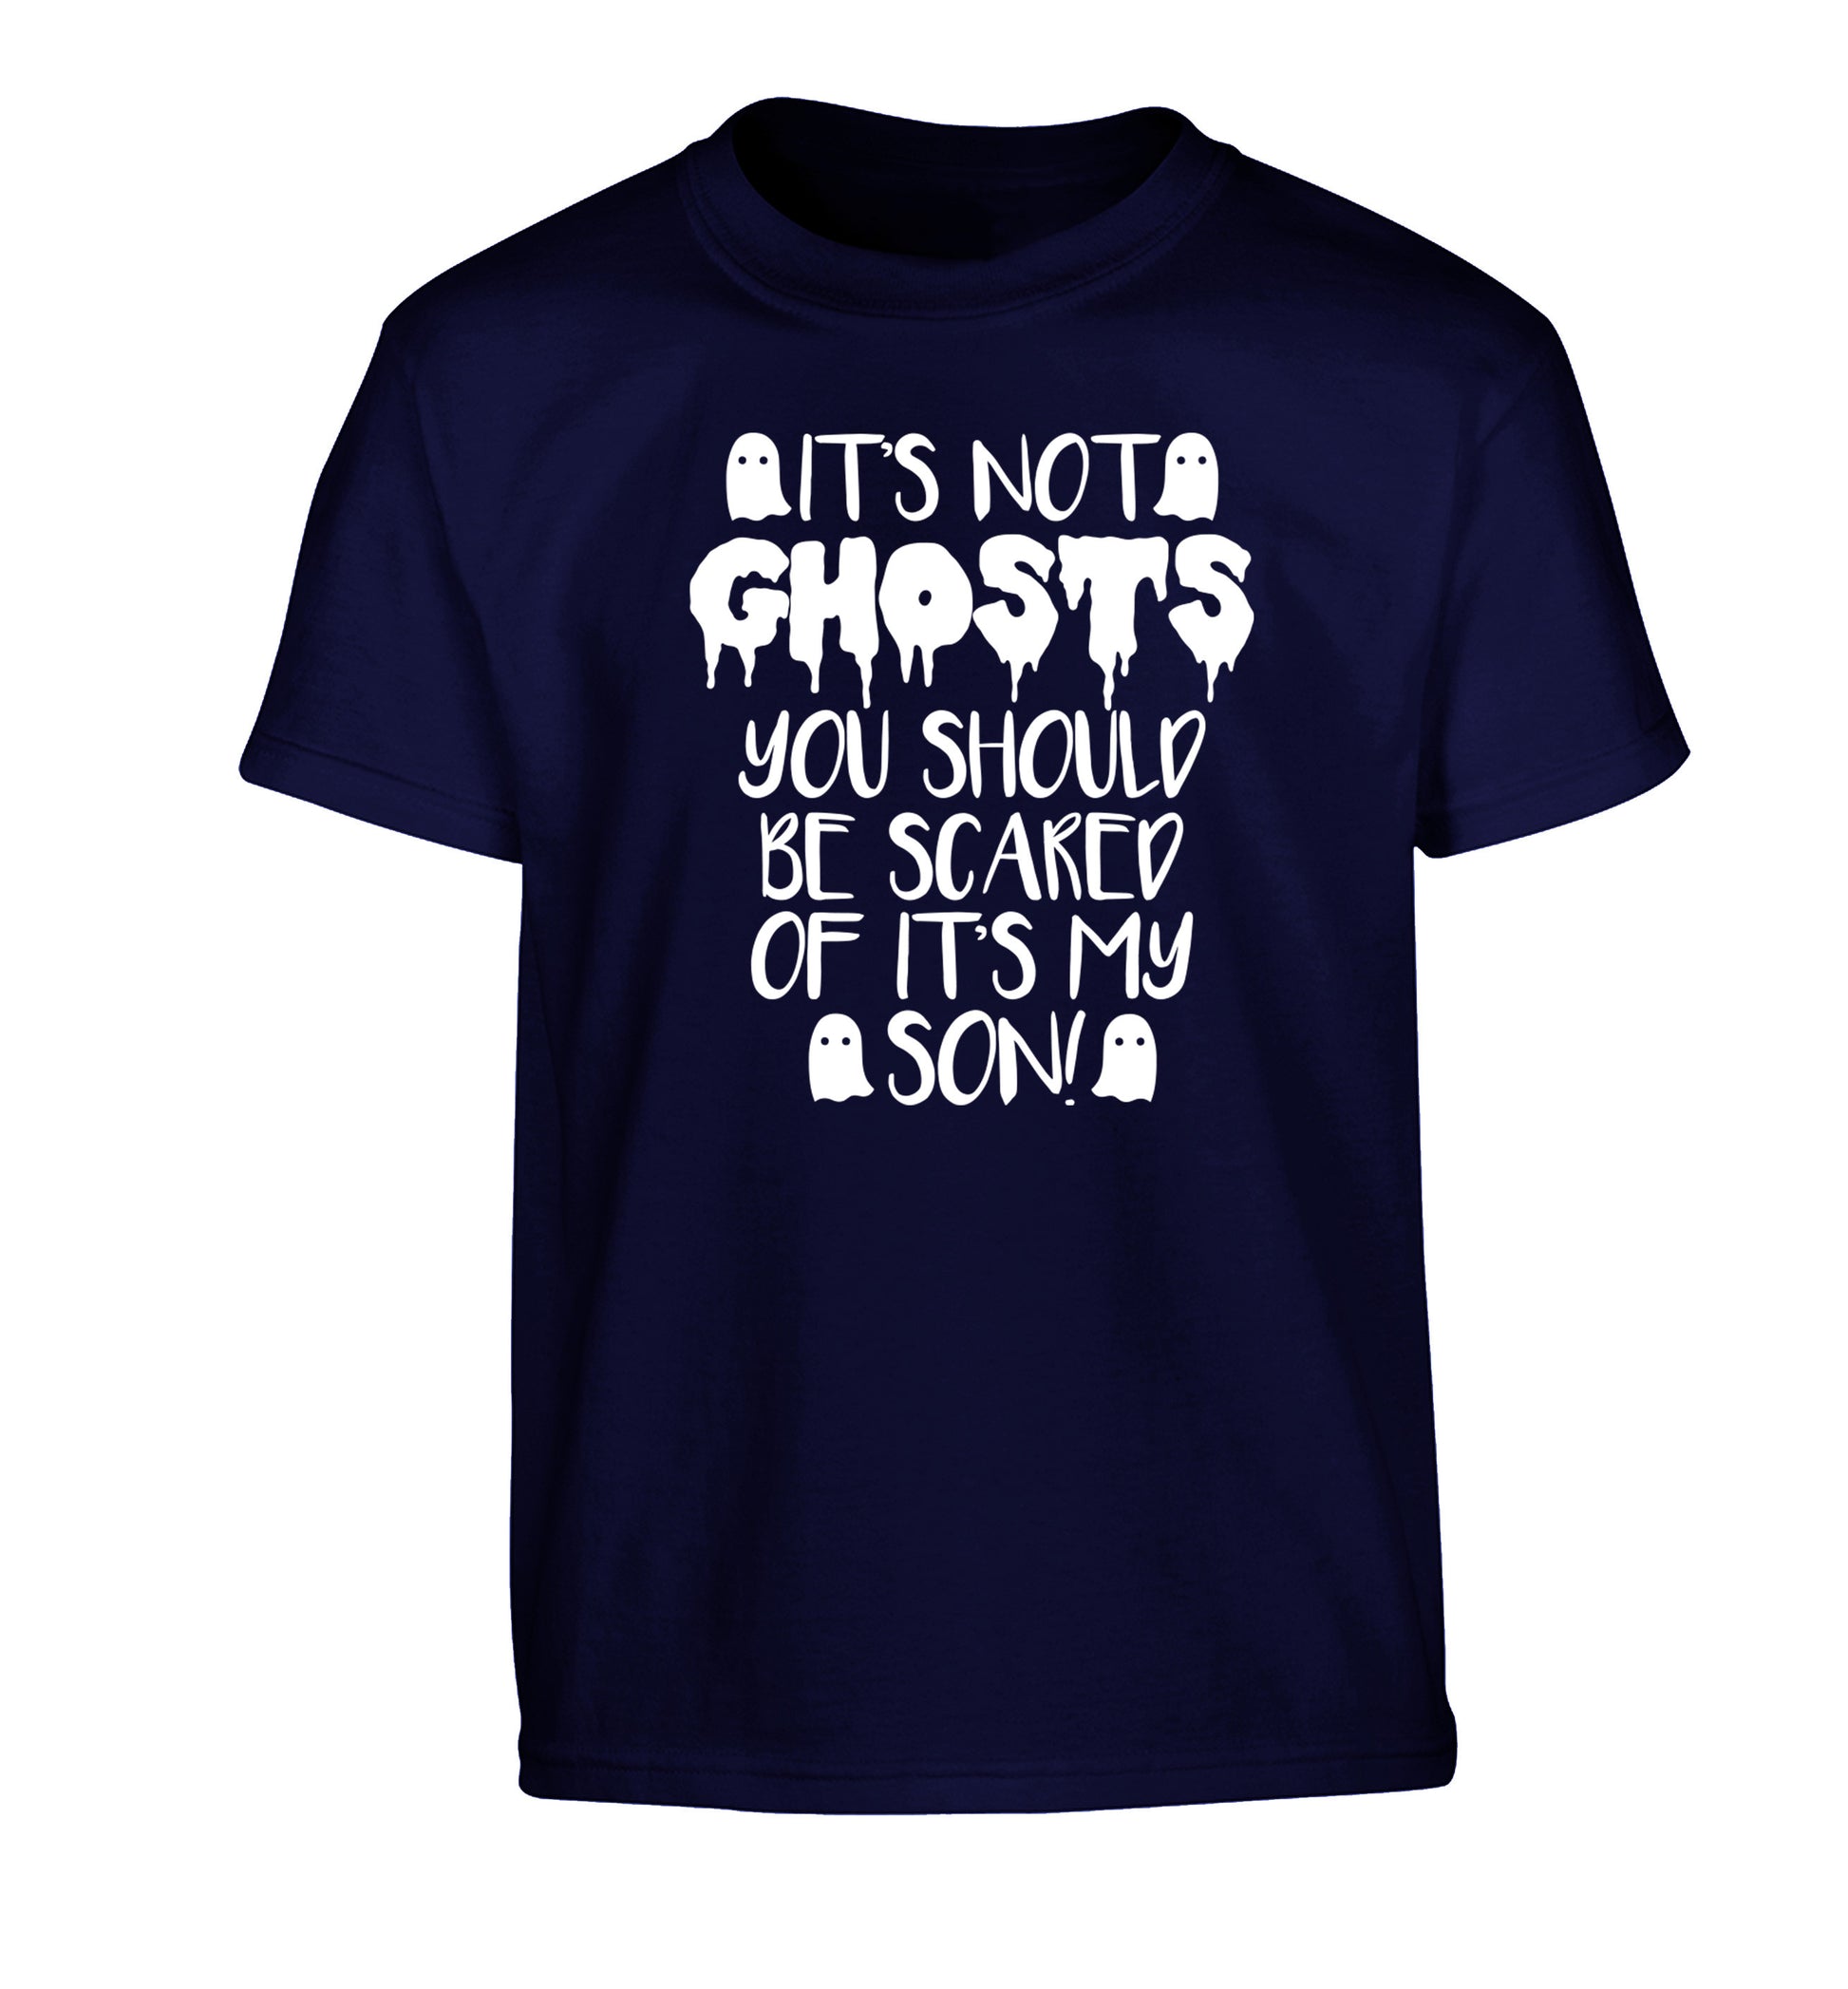 It's not ghosts you should be scared of it's my son! Children's navy Tshirt 12-14 Years